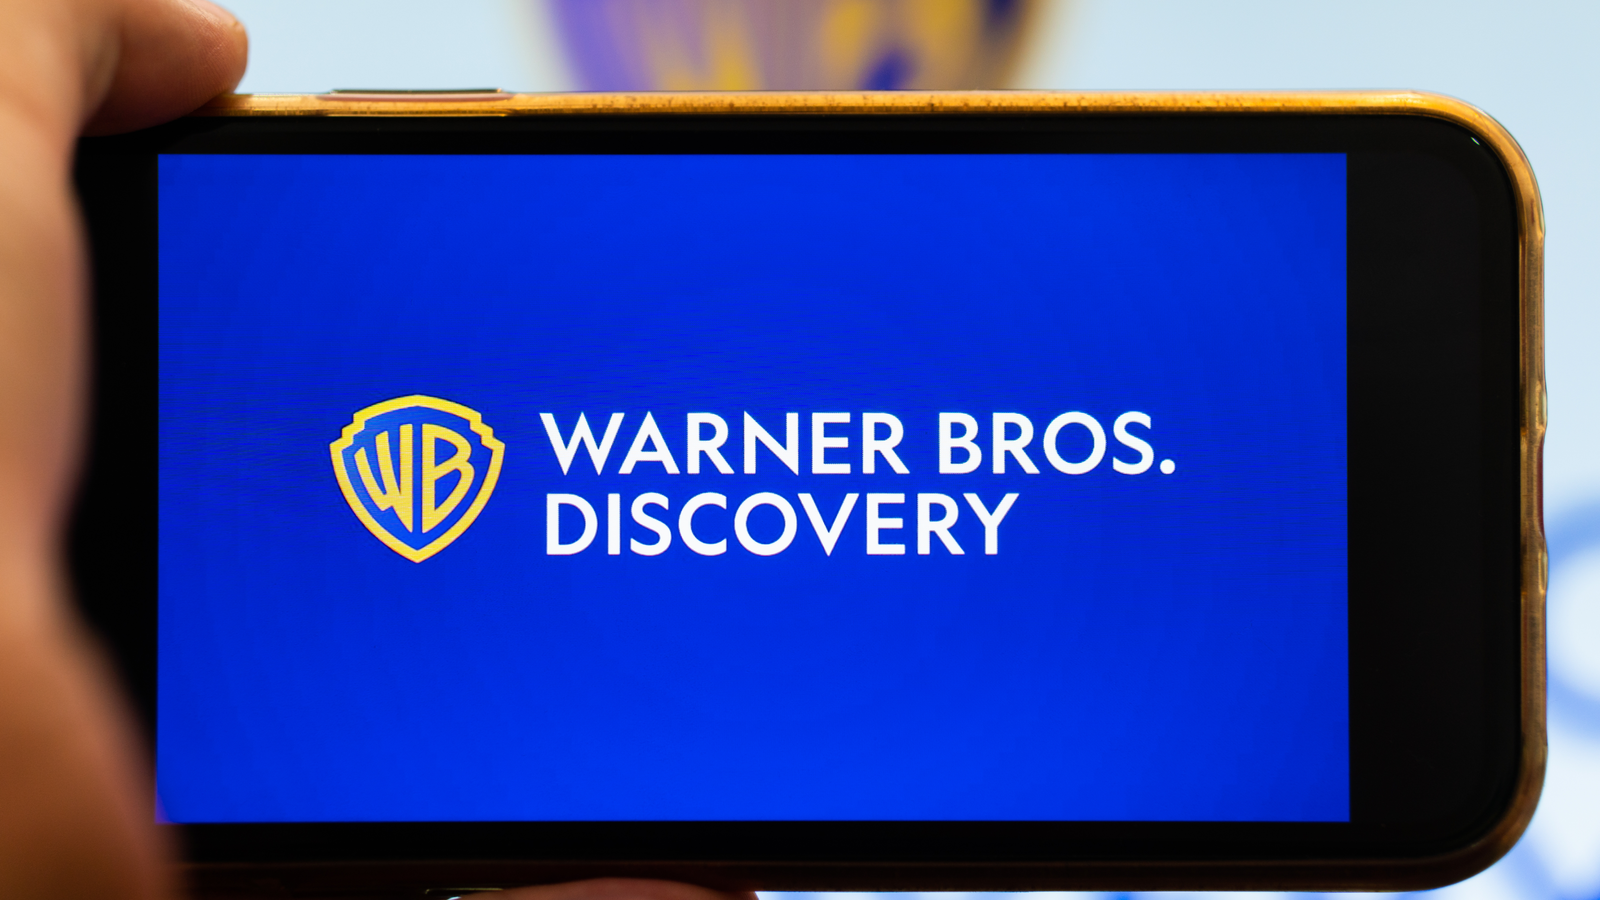 WBD Stock. The logo of the new Warner Bros Discovery company on smartphone screen.